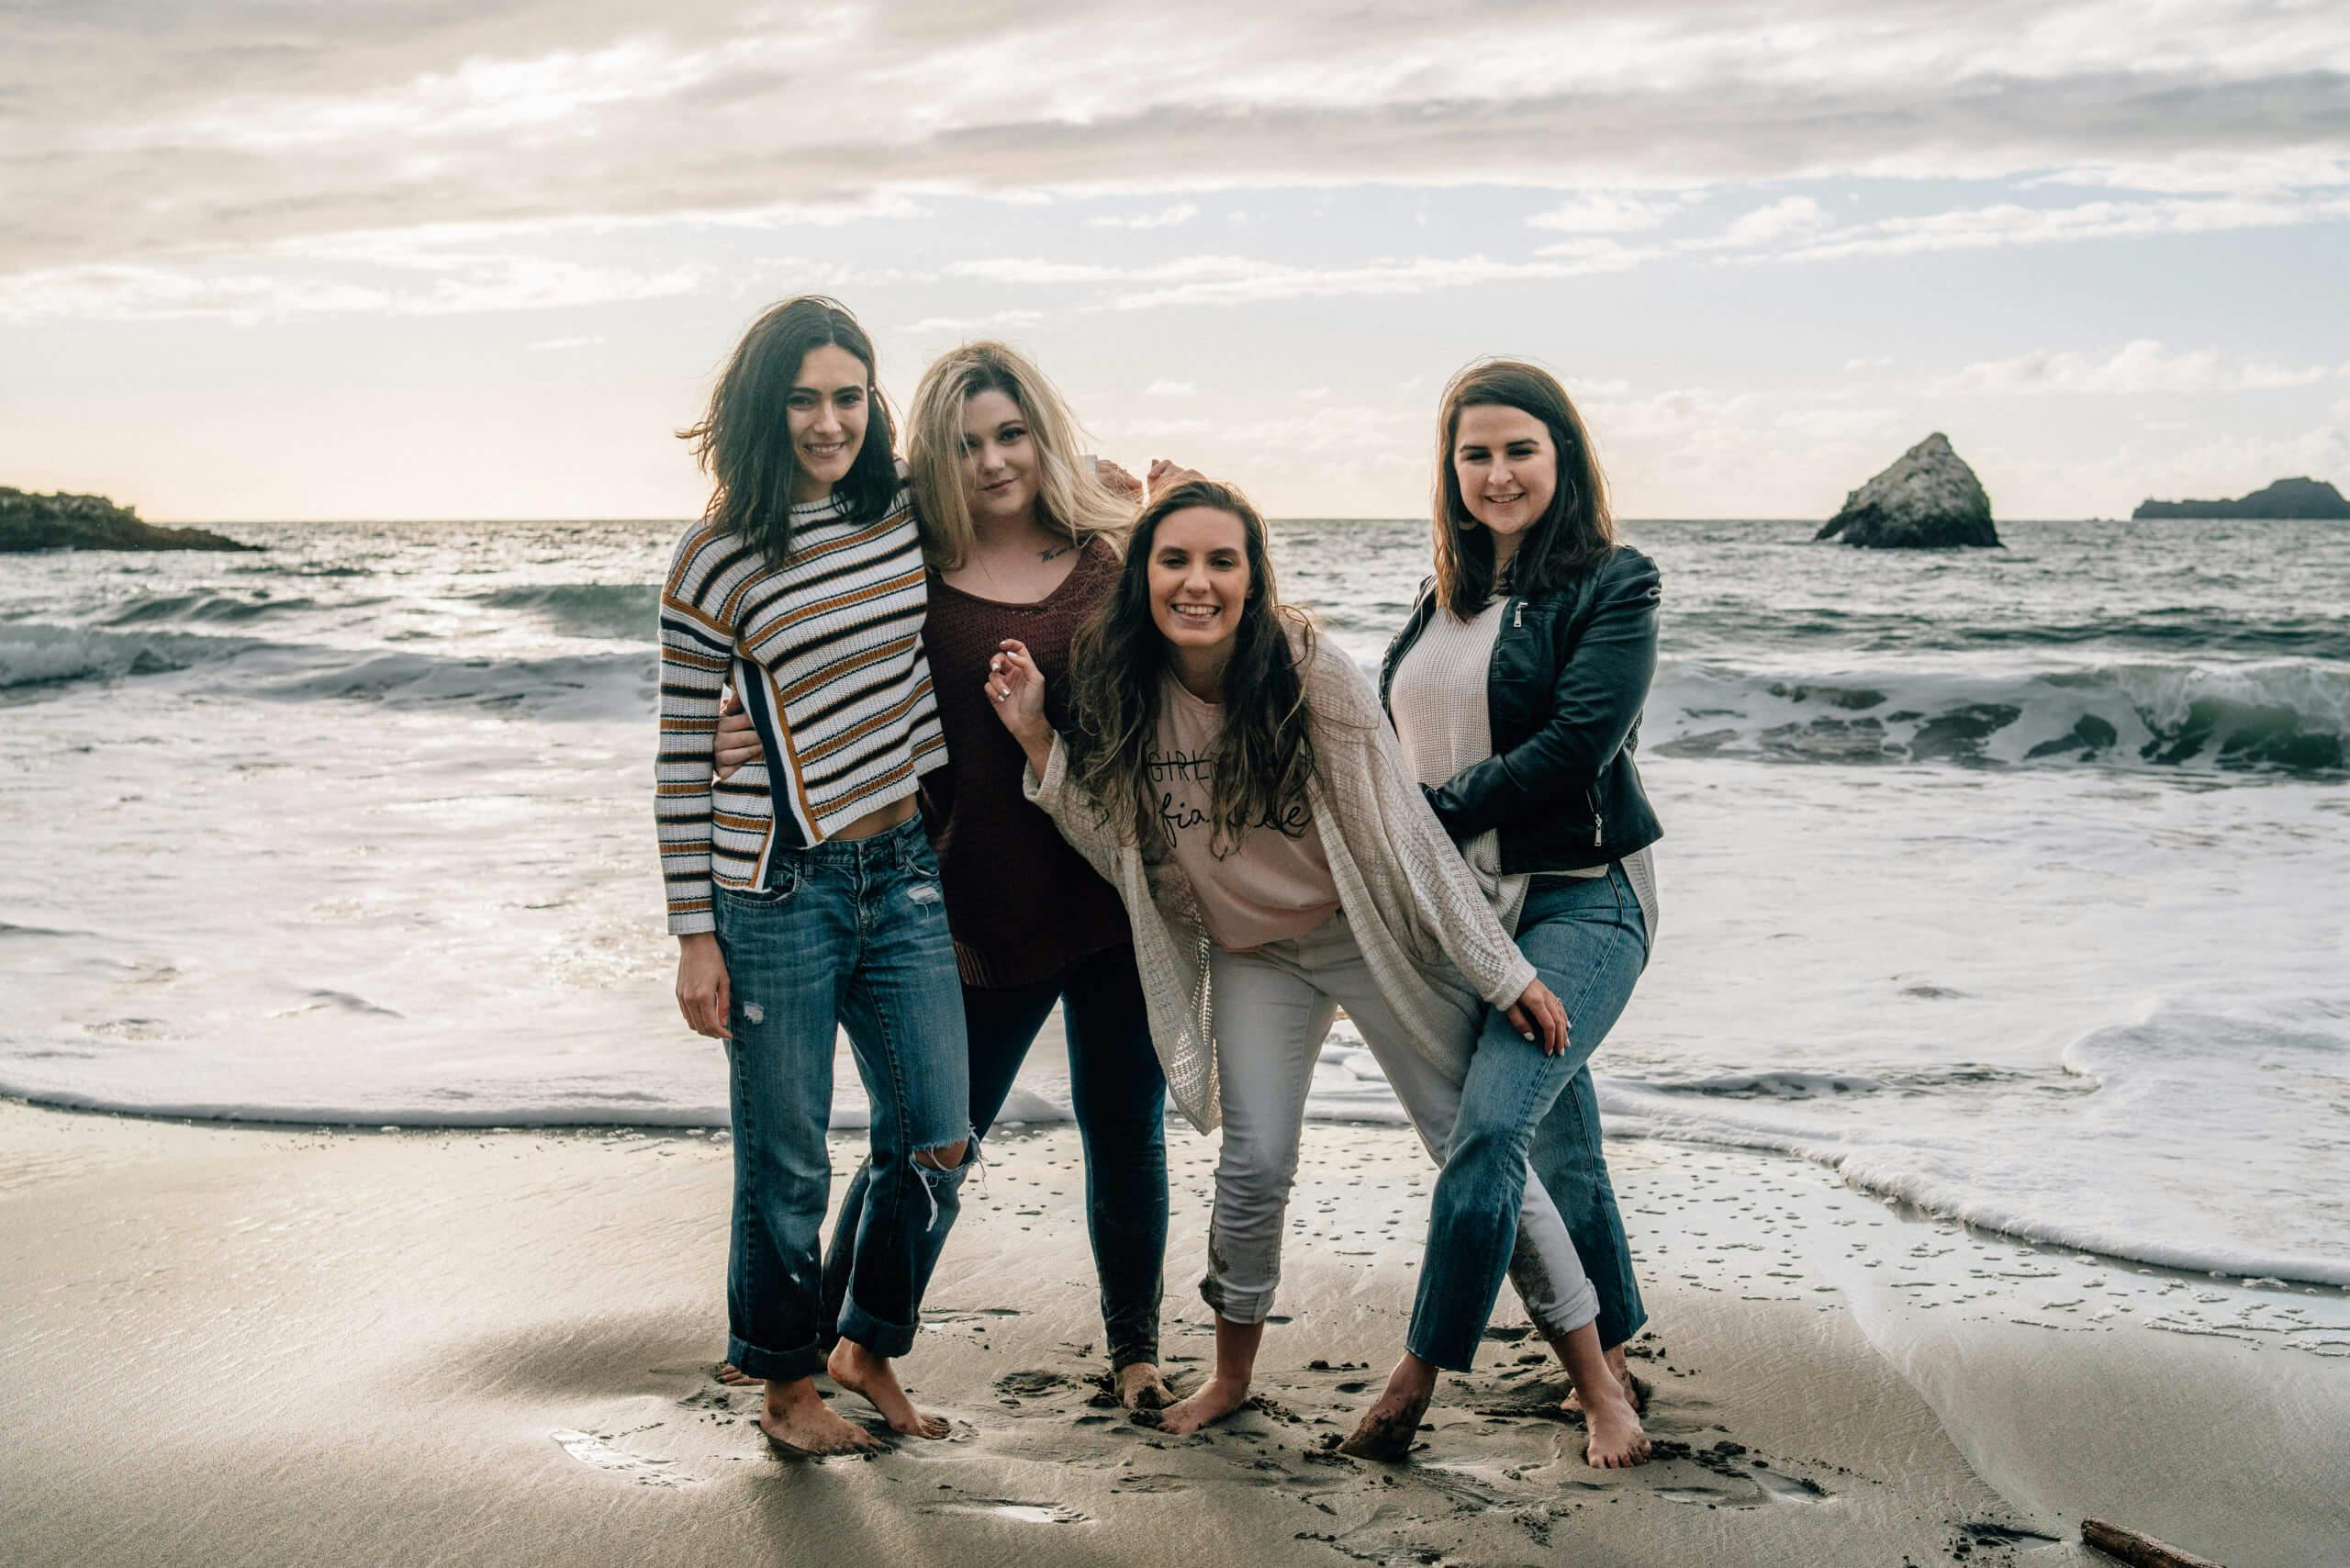 Four women standing on a beach with waves and rocks in the background.